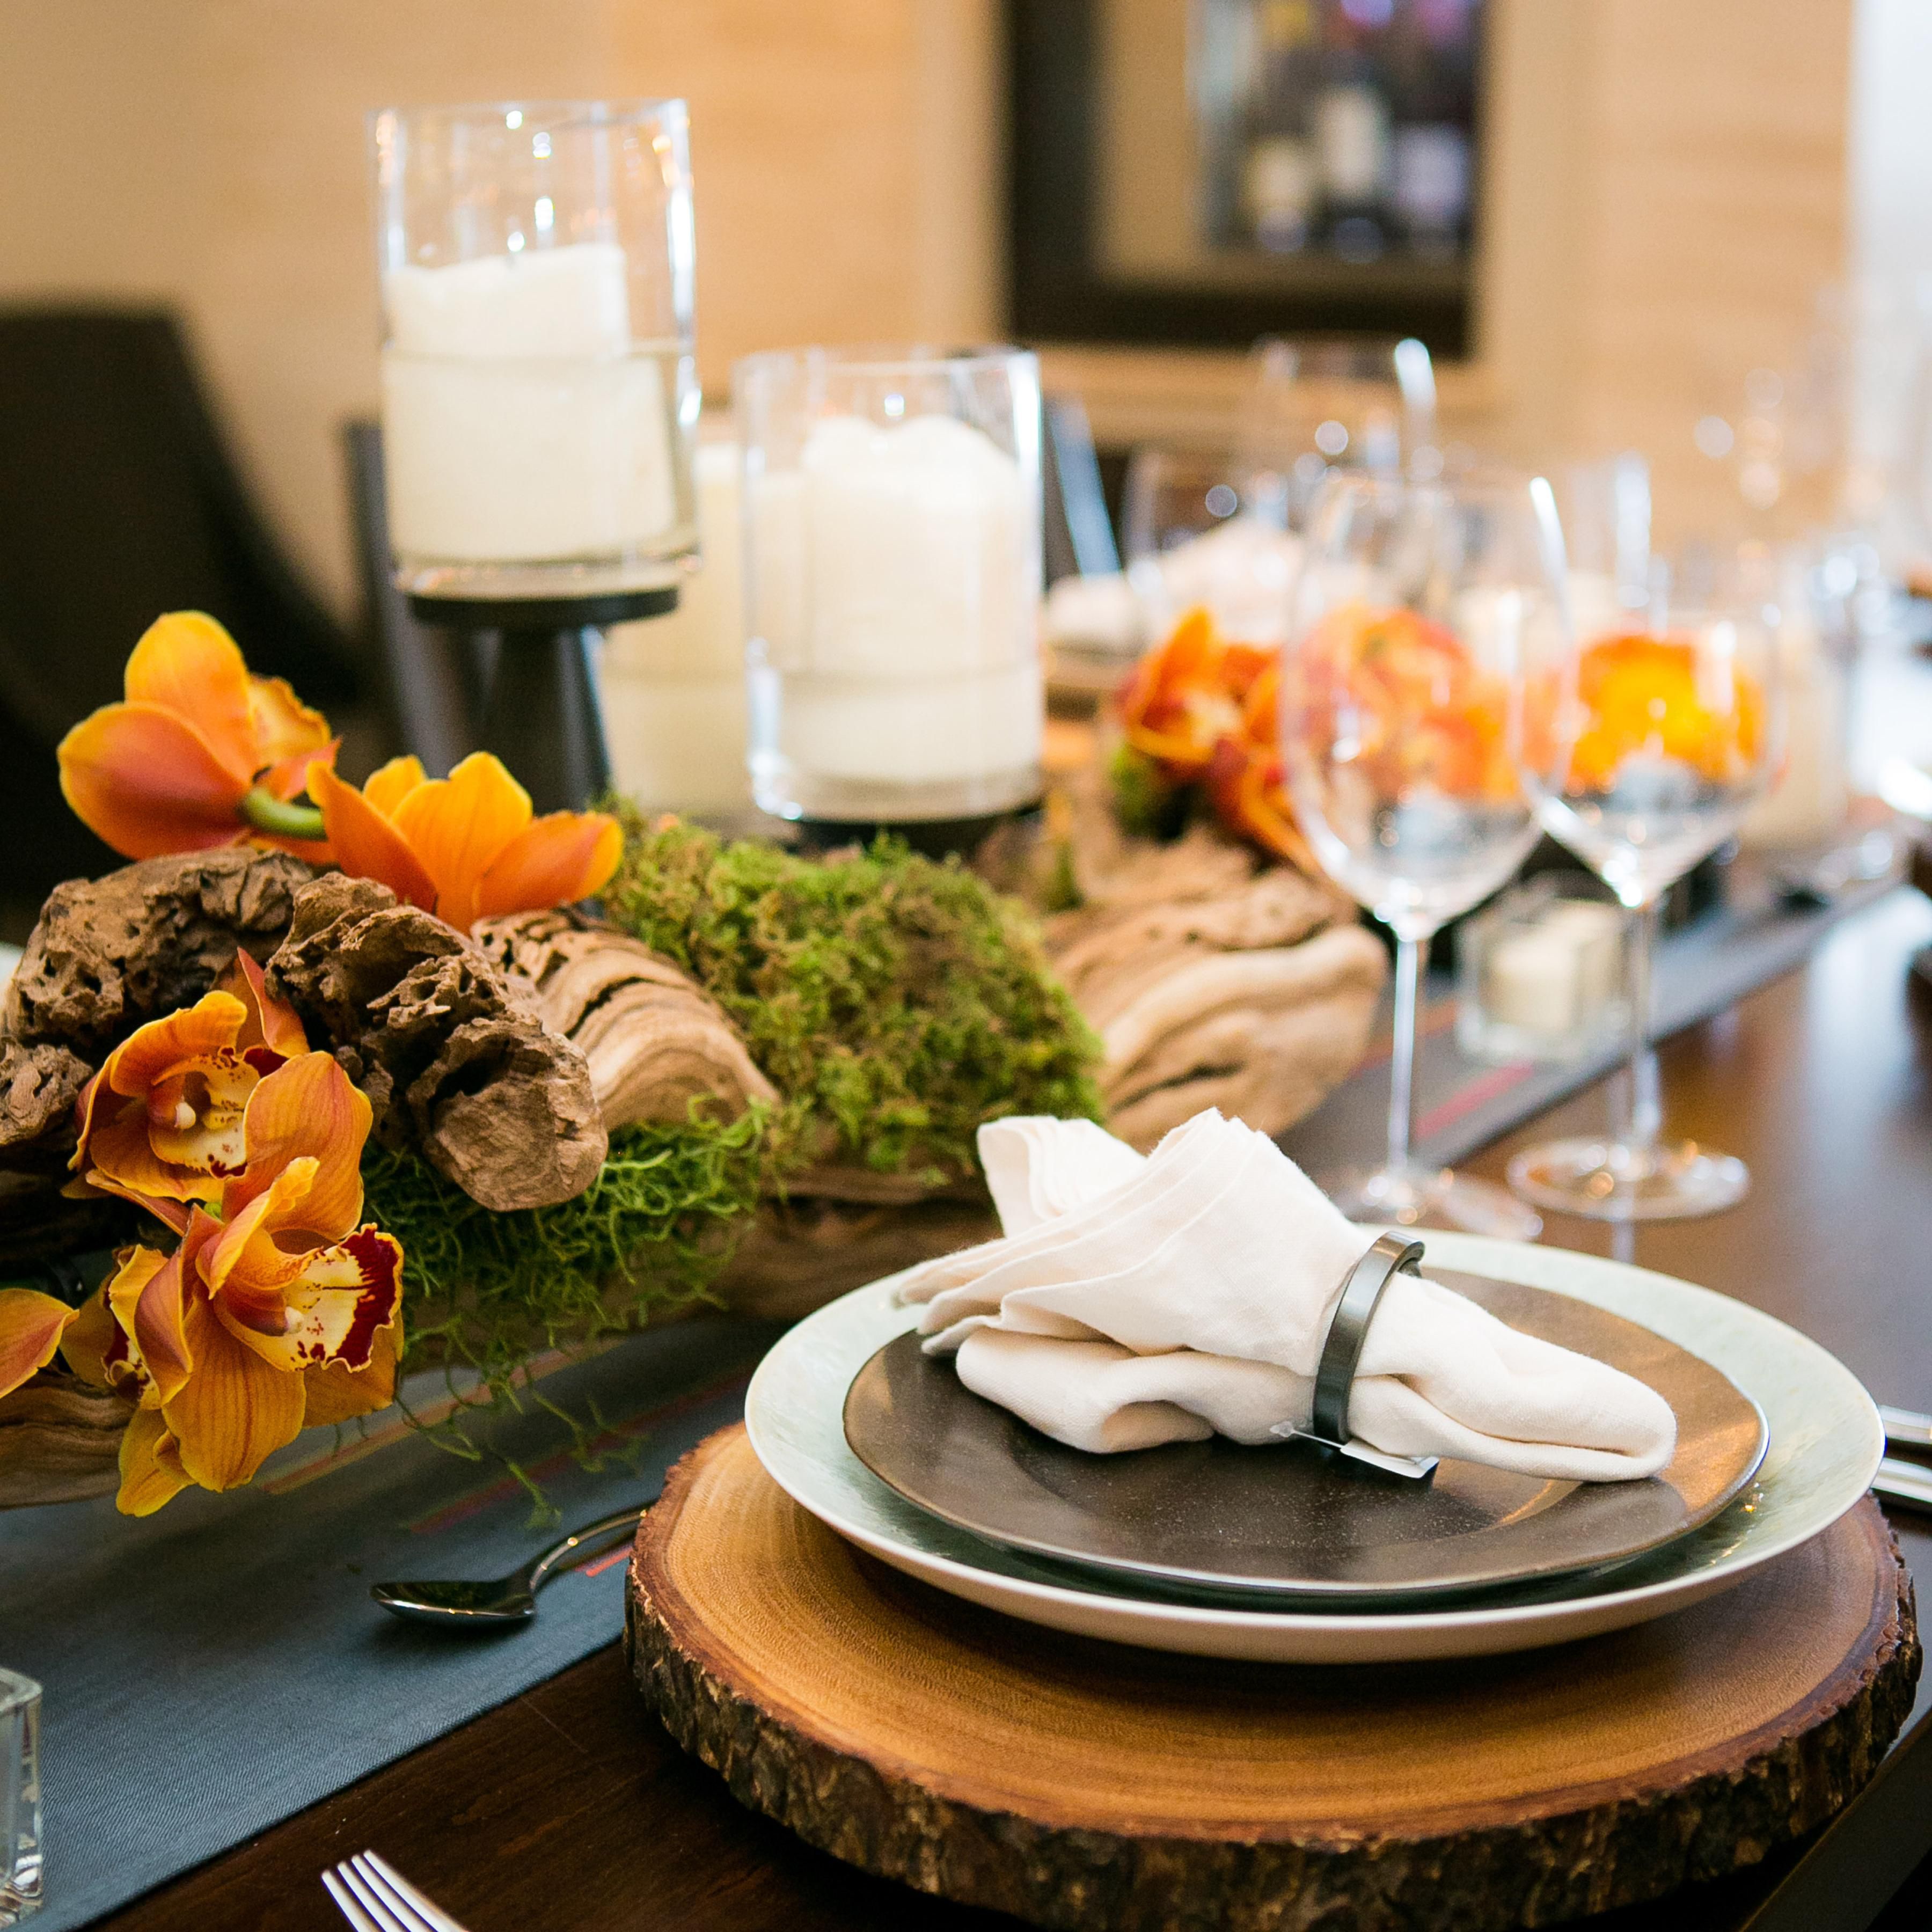 Distinctive dining experiences at our Costa Mesa hotel.